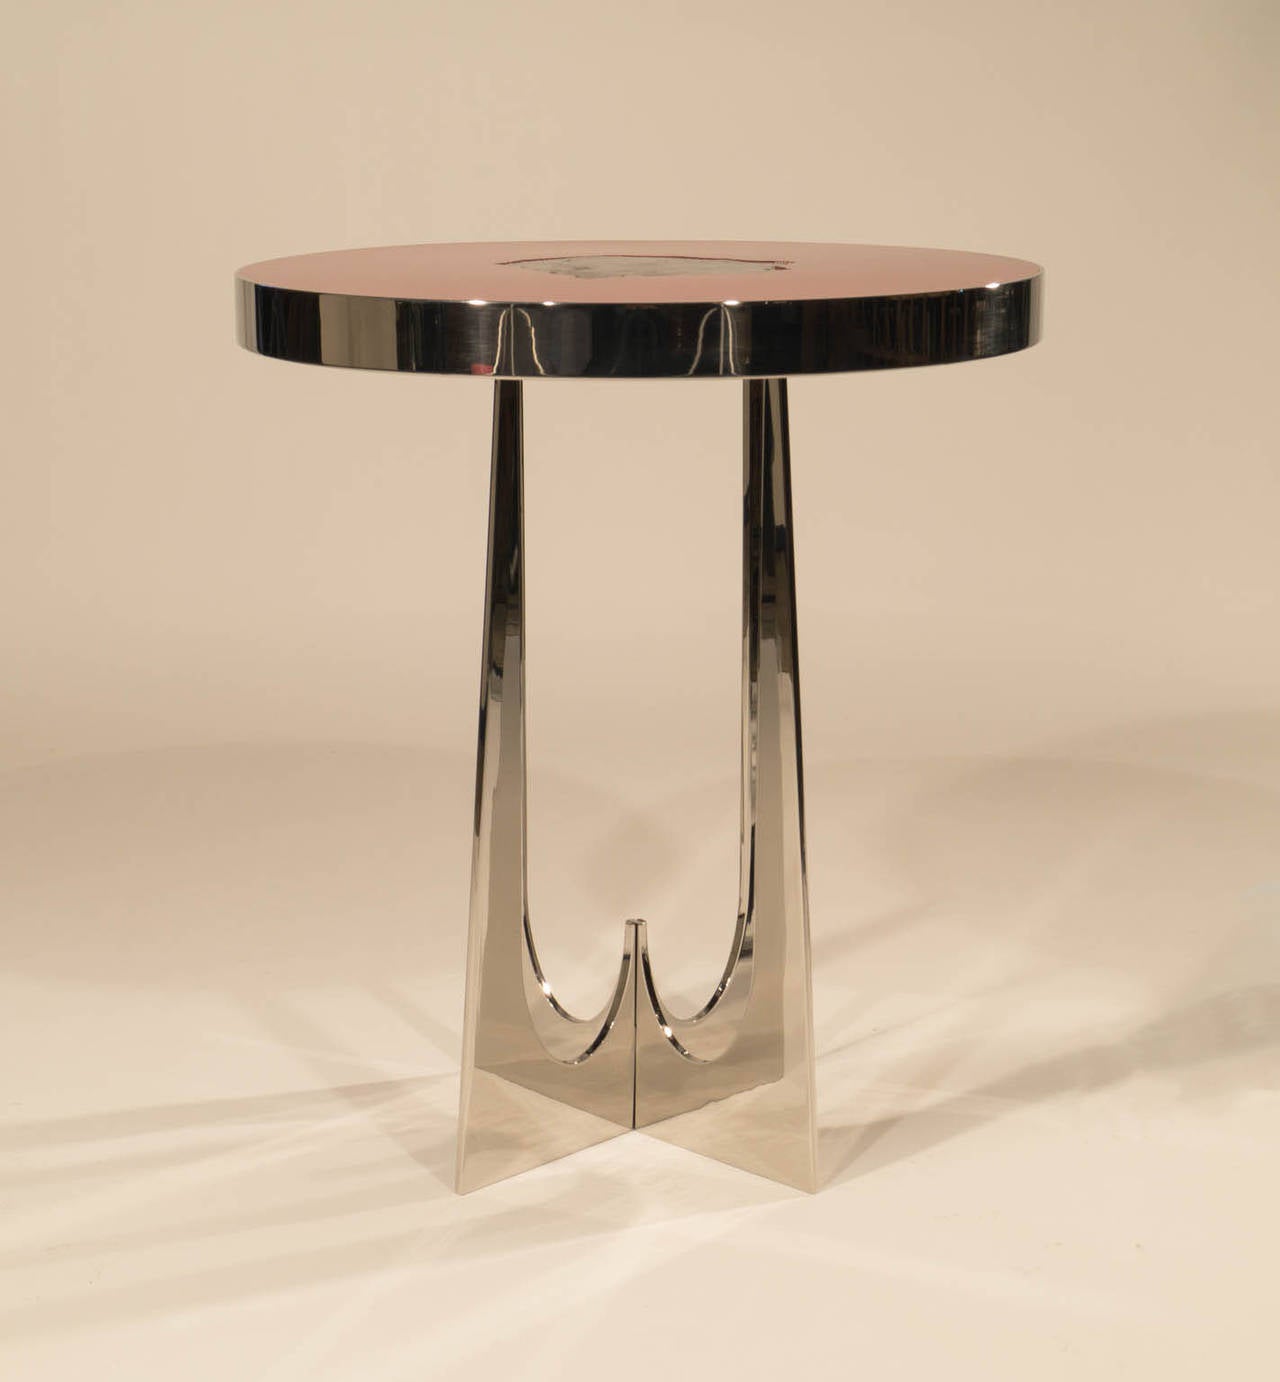 Beautiful stainless steel and resin with a Meteorite inclusion side table designed by Adam Thomas Hebb. His work with resin, ammonite and/or stone make each of his pieces a little unique jewel. They are handmade in his studio in Los Angeles.